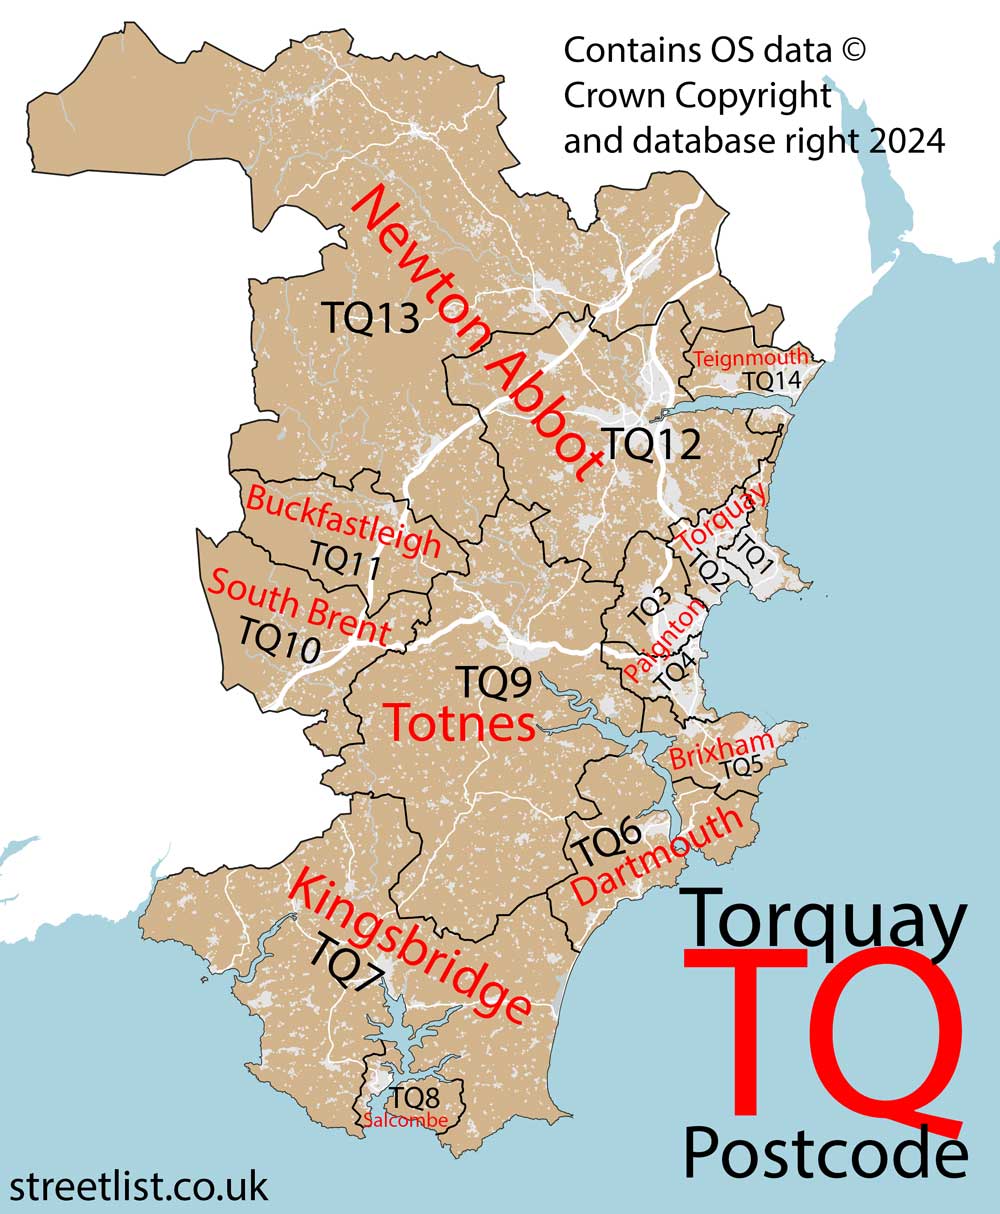 Detailed map of the TQ Postcode Area